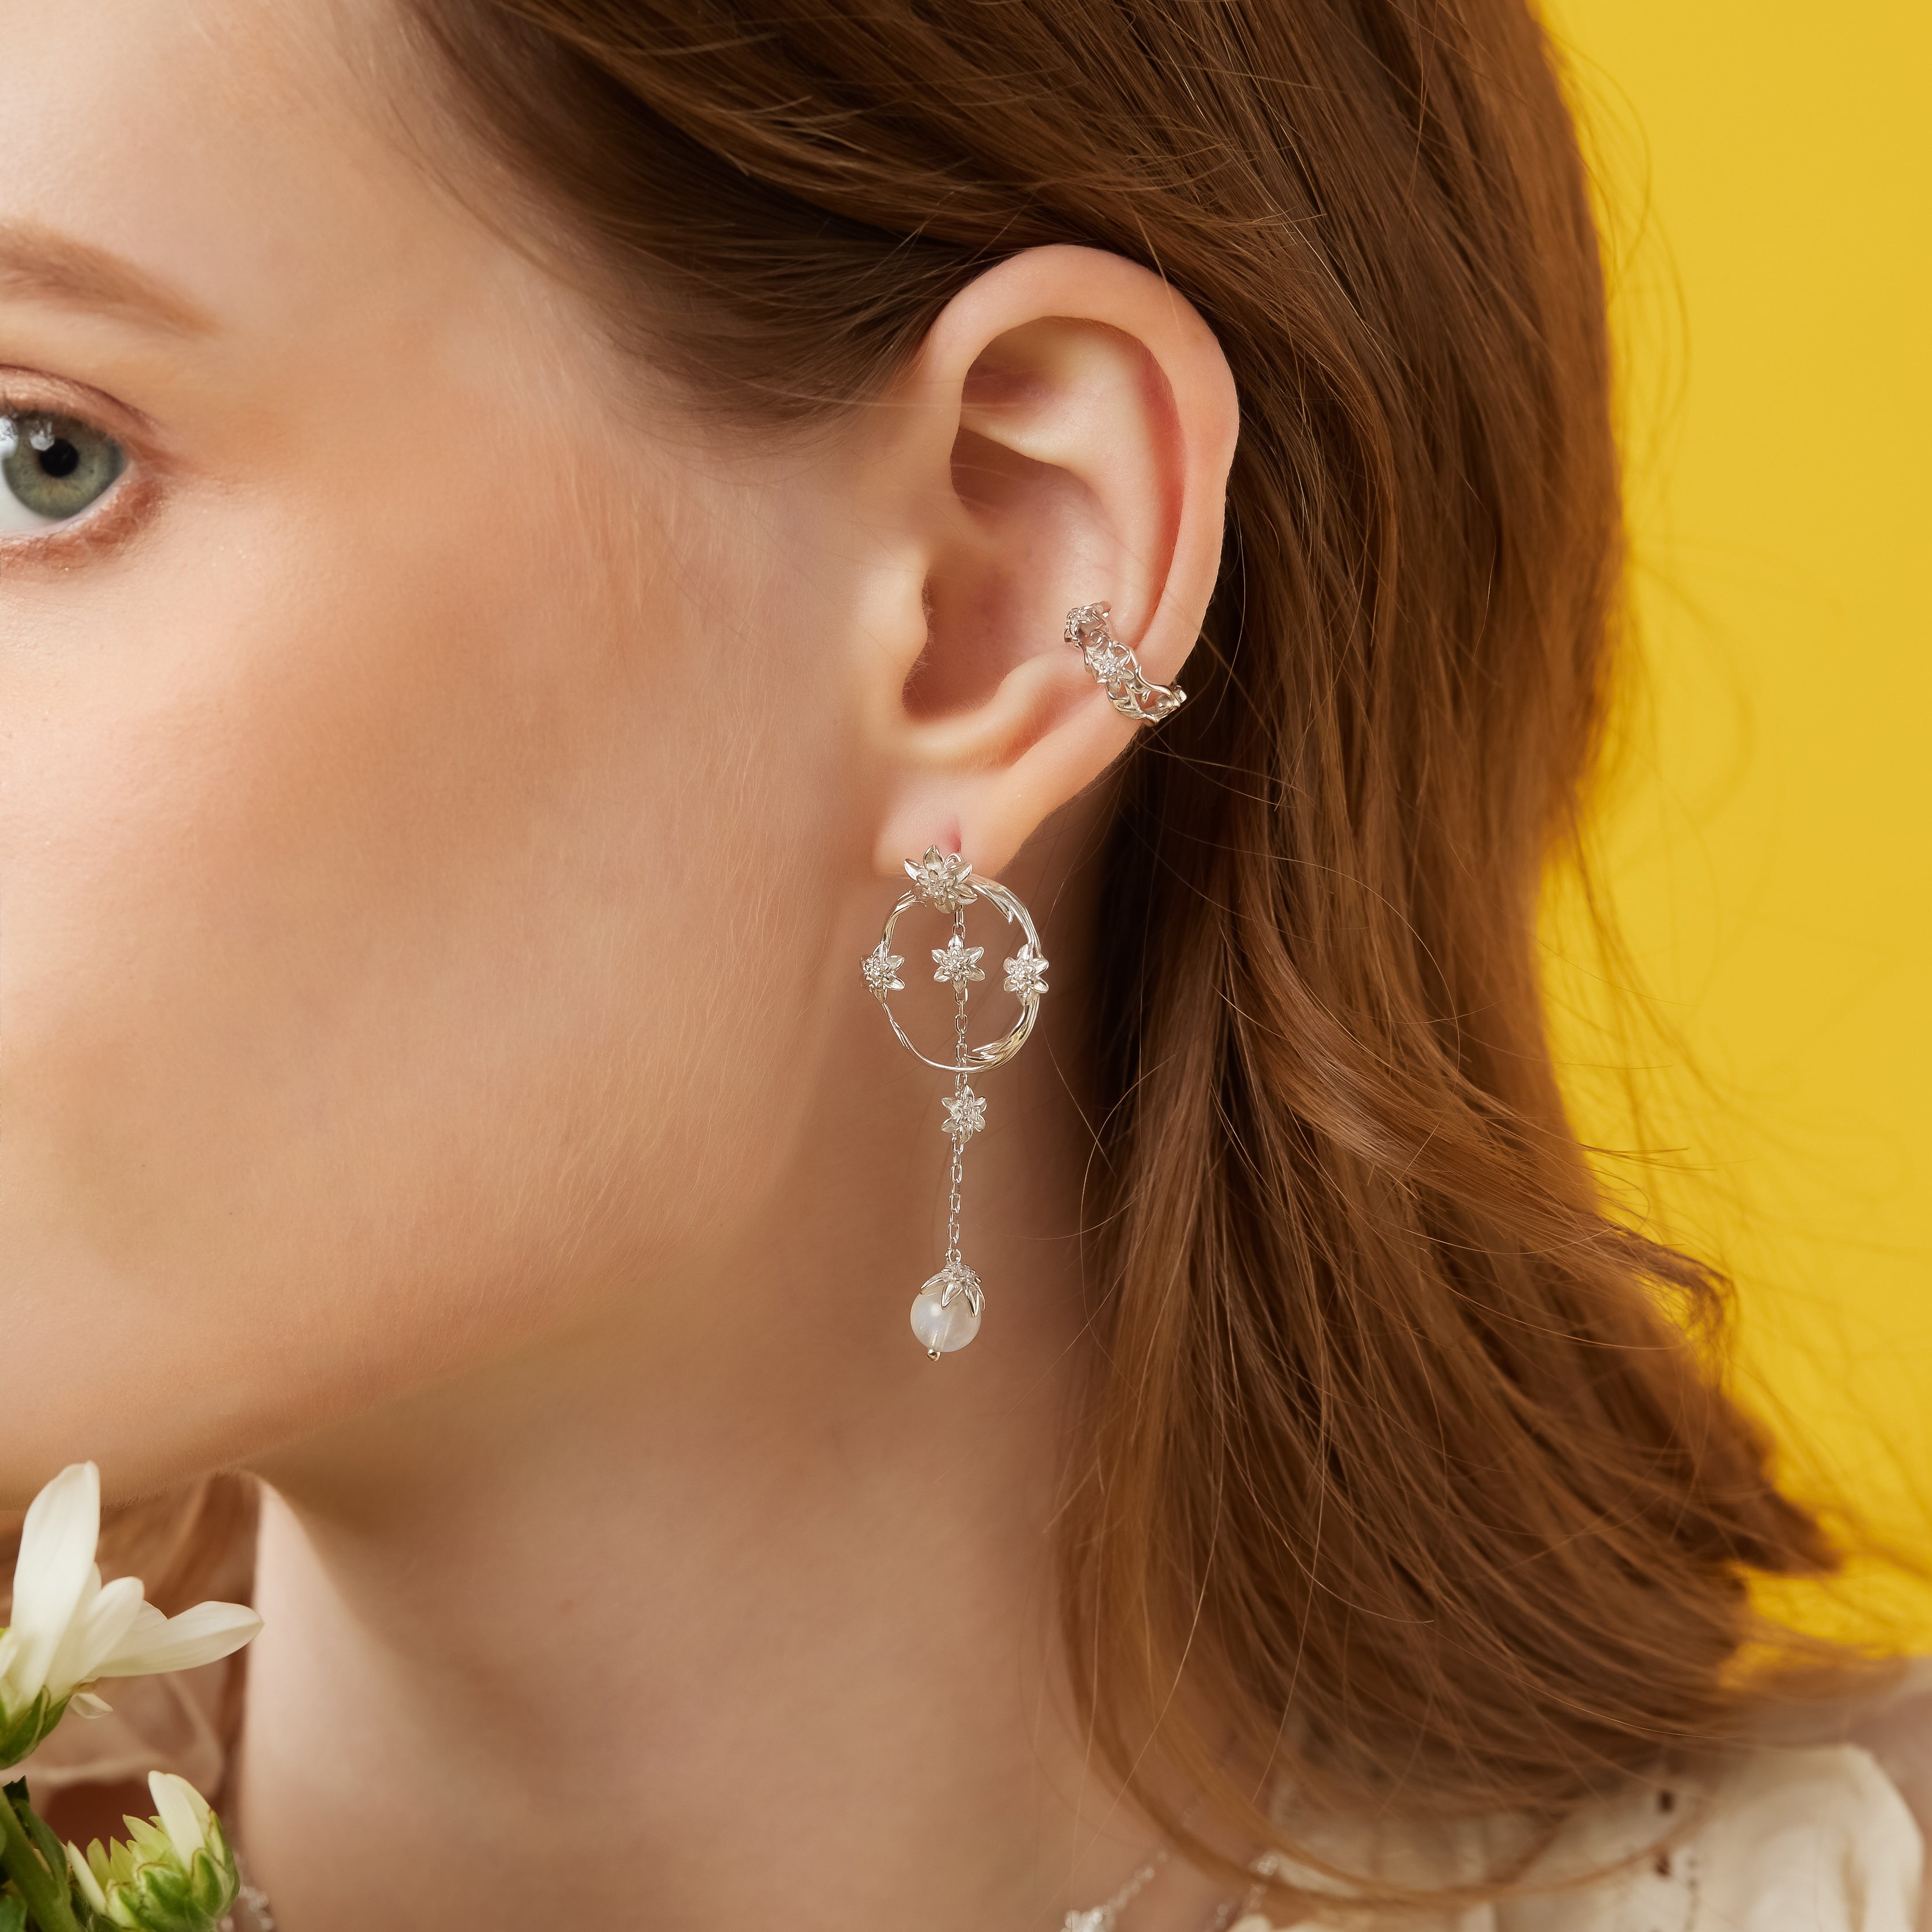 Moonstone Silver Asymmetrical Floral Earrings - Daffodil | LOVE BY THE MOON